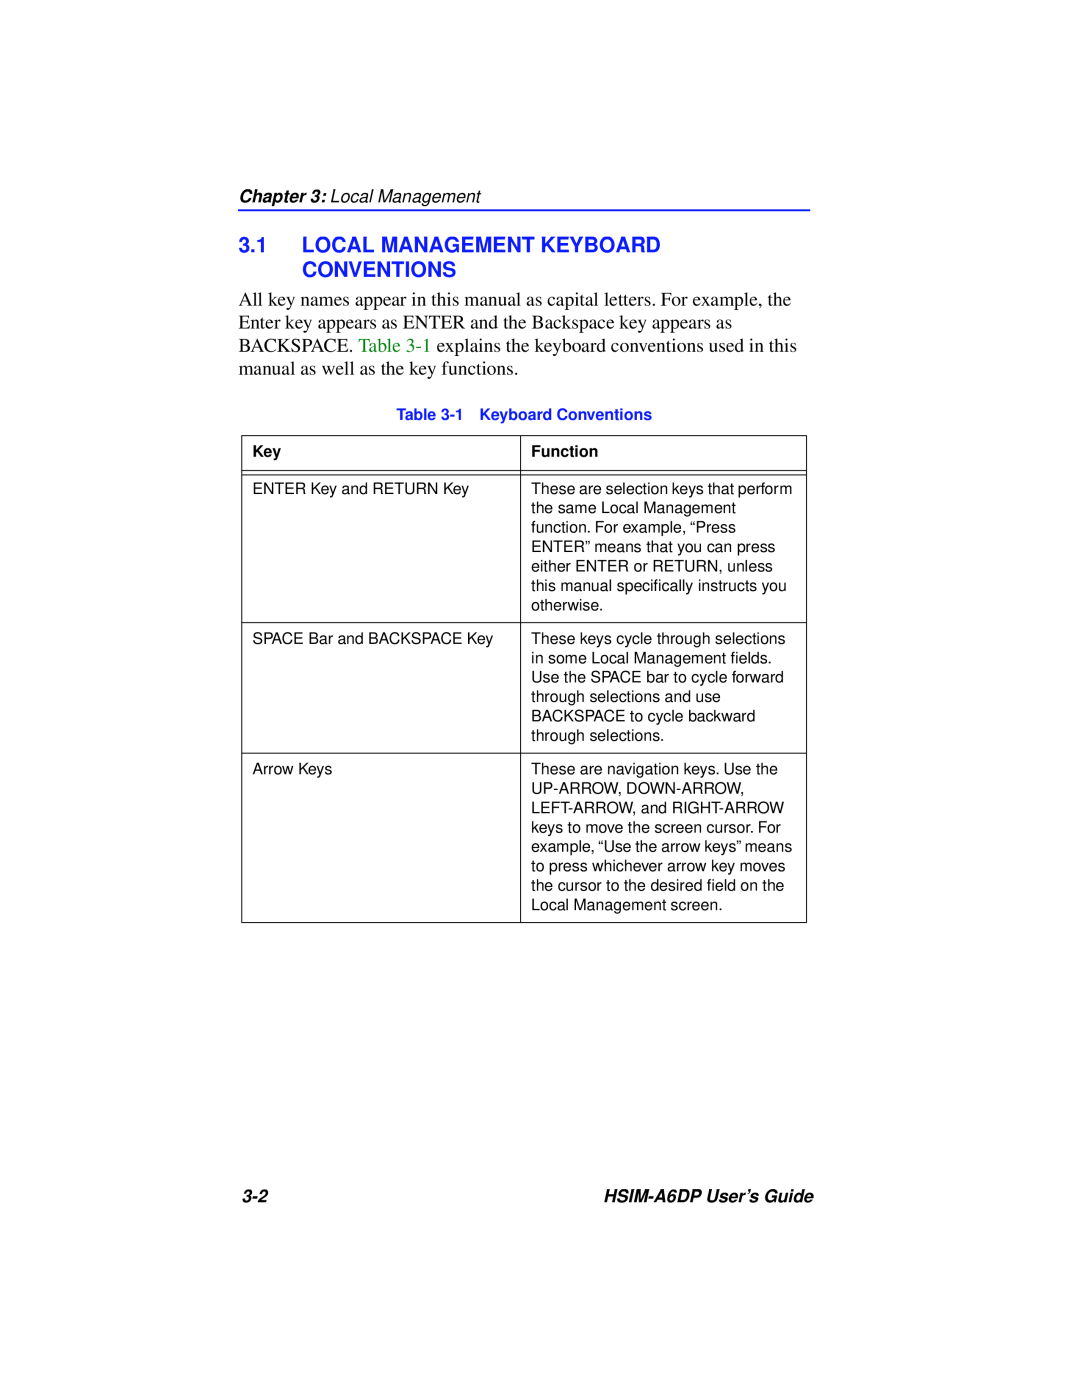 Cabletron Systems manual Local Management Keyboard Conventions, HSIM-A6DP User’s Guide, 1 Keyboard Conventions, Function 